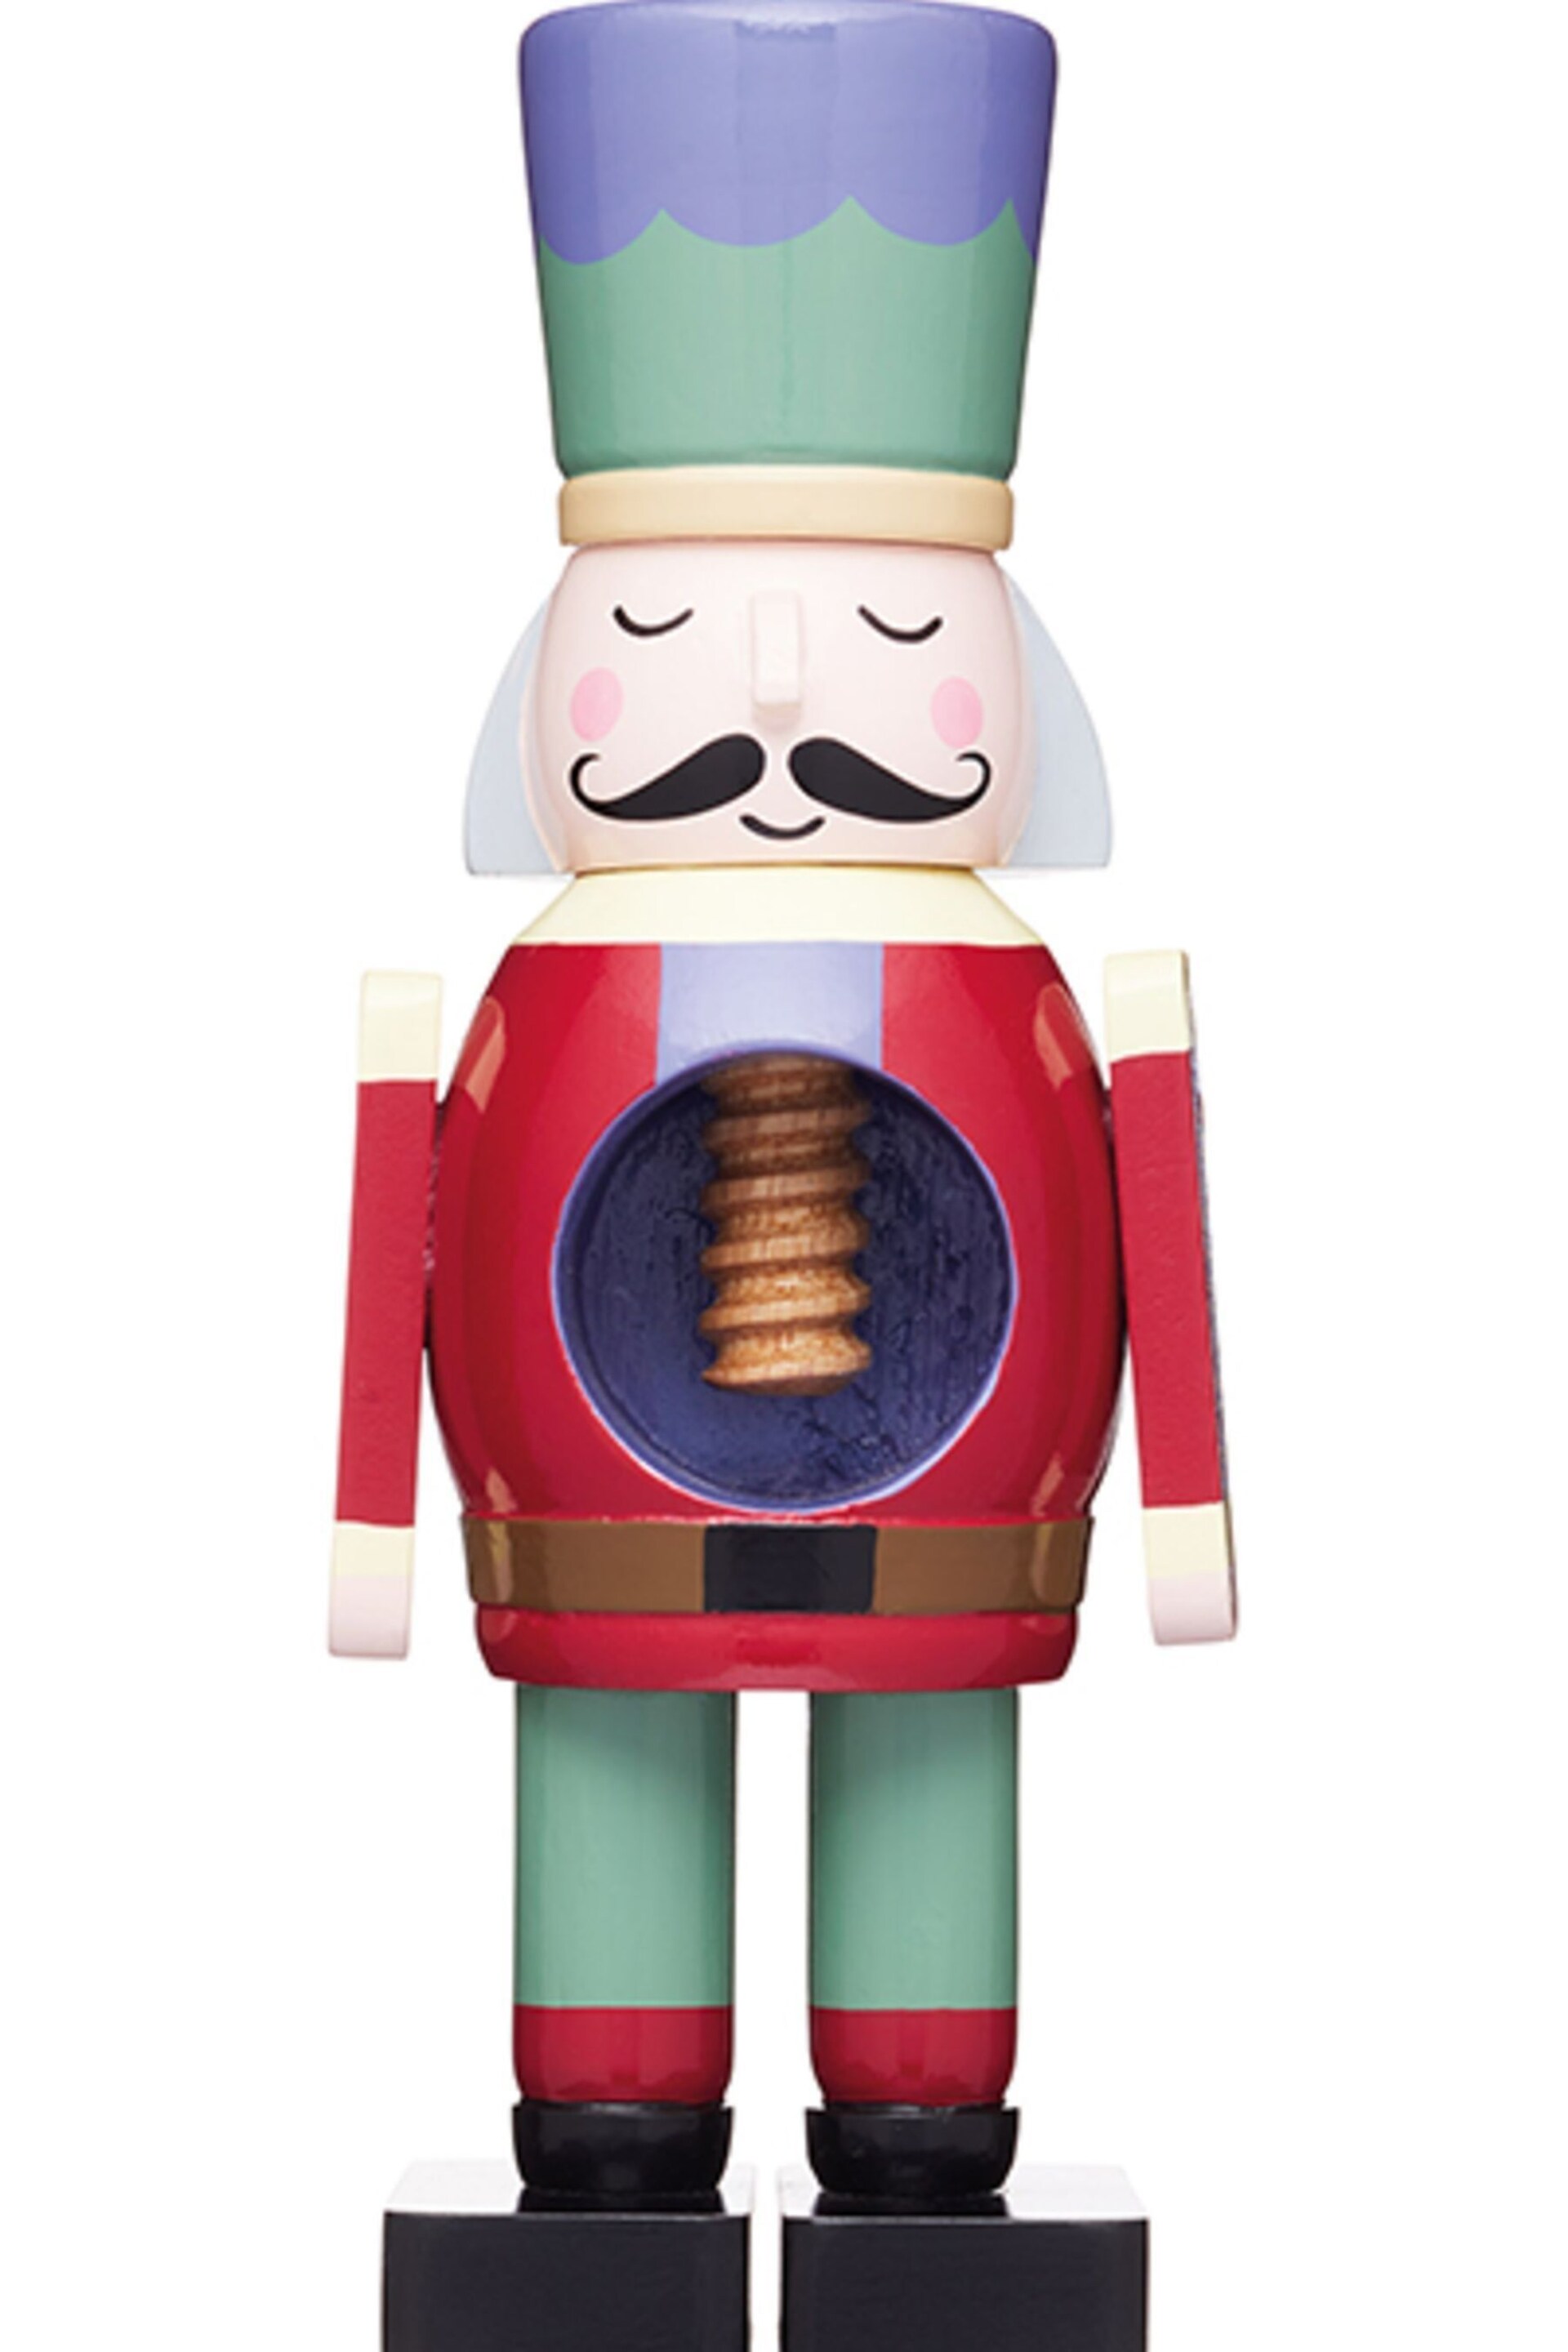 Kitchencraft Mixed The Nutcracker Collection Wooden Soldier - Image 3 of 3